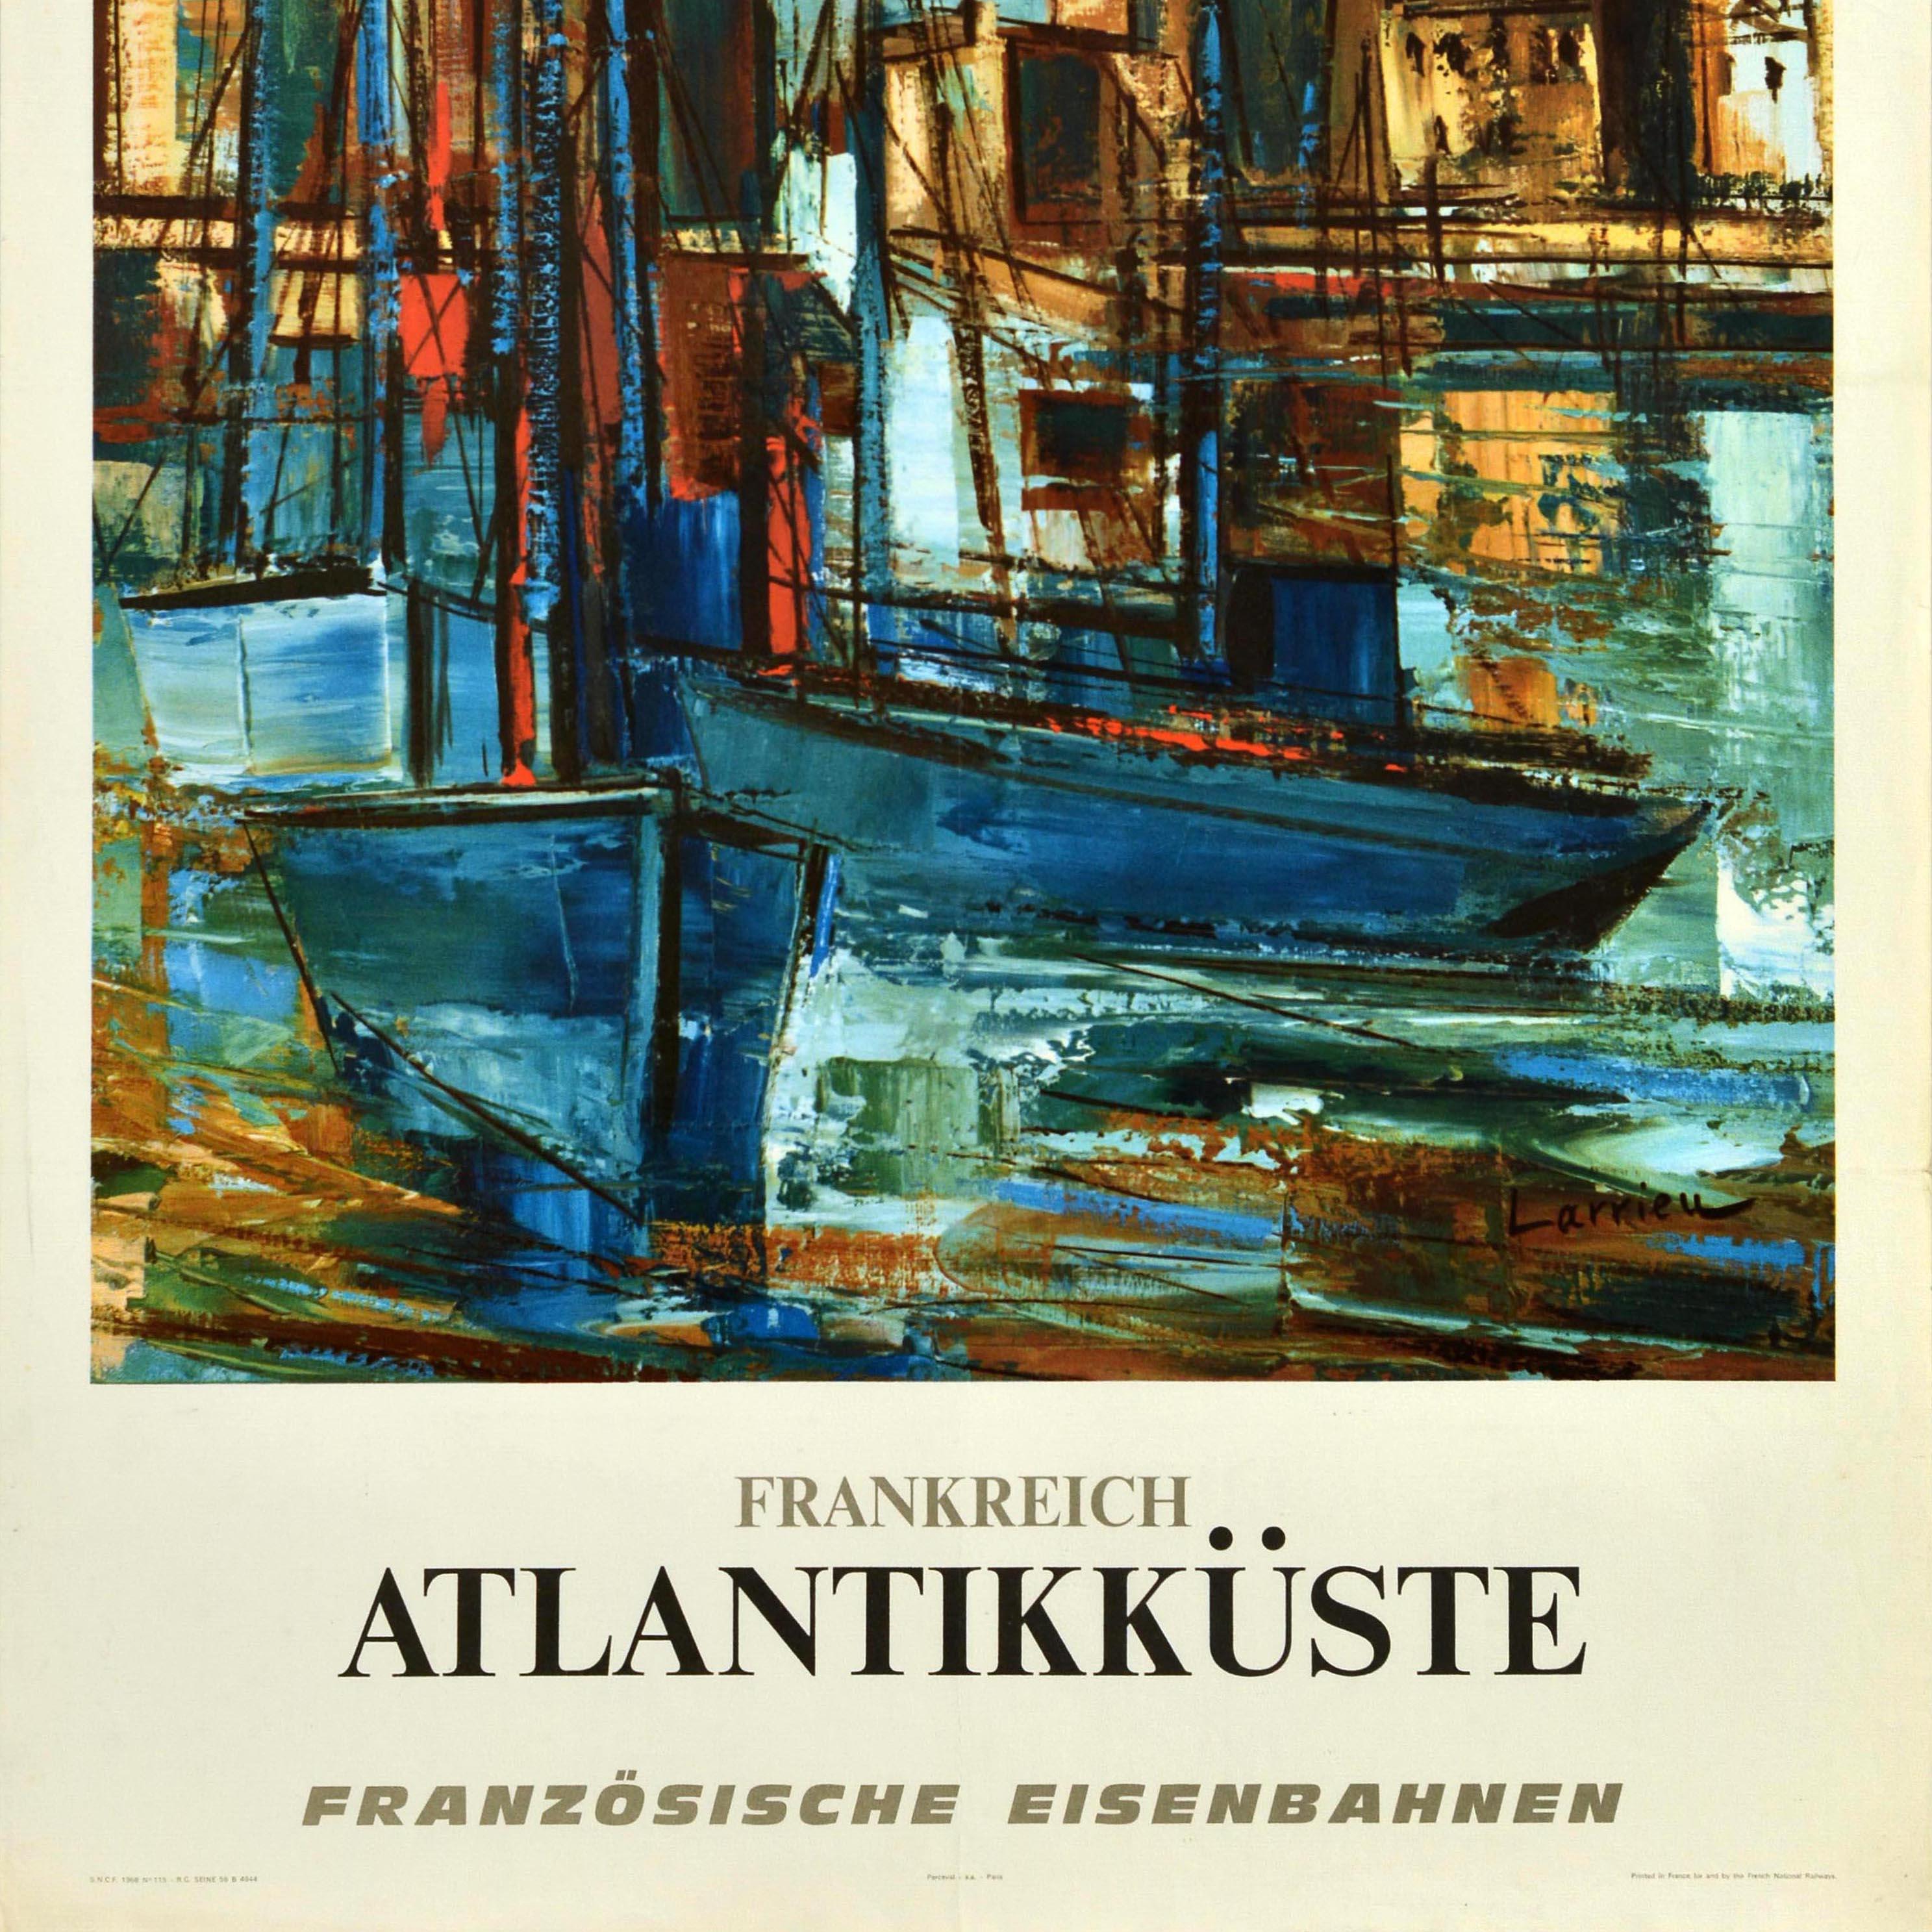 Original vintage French Railways travel poster advertising France The Atlantic Coast in German - Frankreich Atlantikkuste - featuring artwork by Gaston Larrieu (1908-1983) depicting a harbour scene with blue wooden sailing boats on the water and